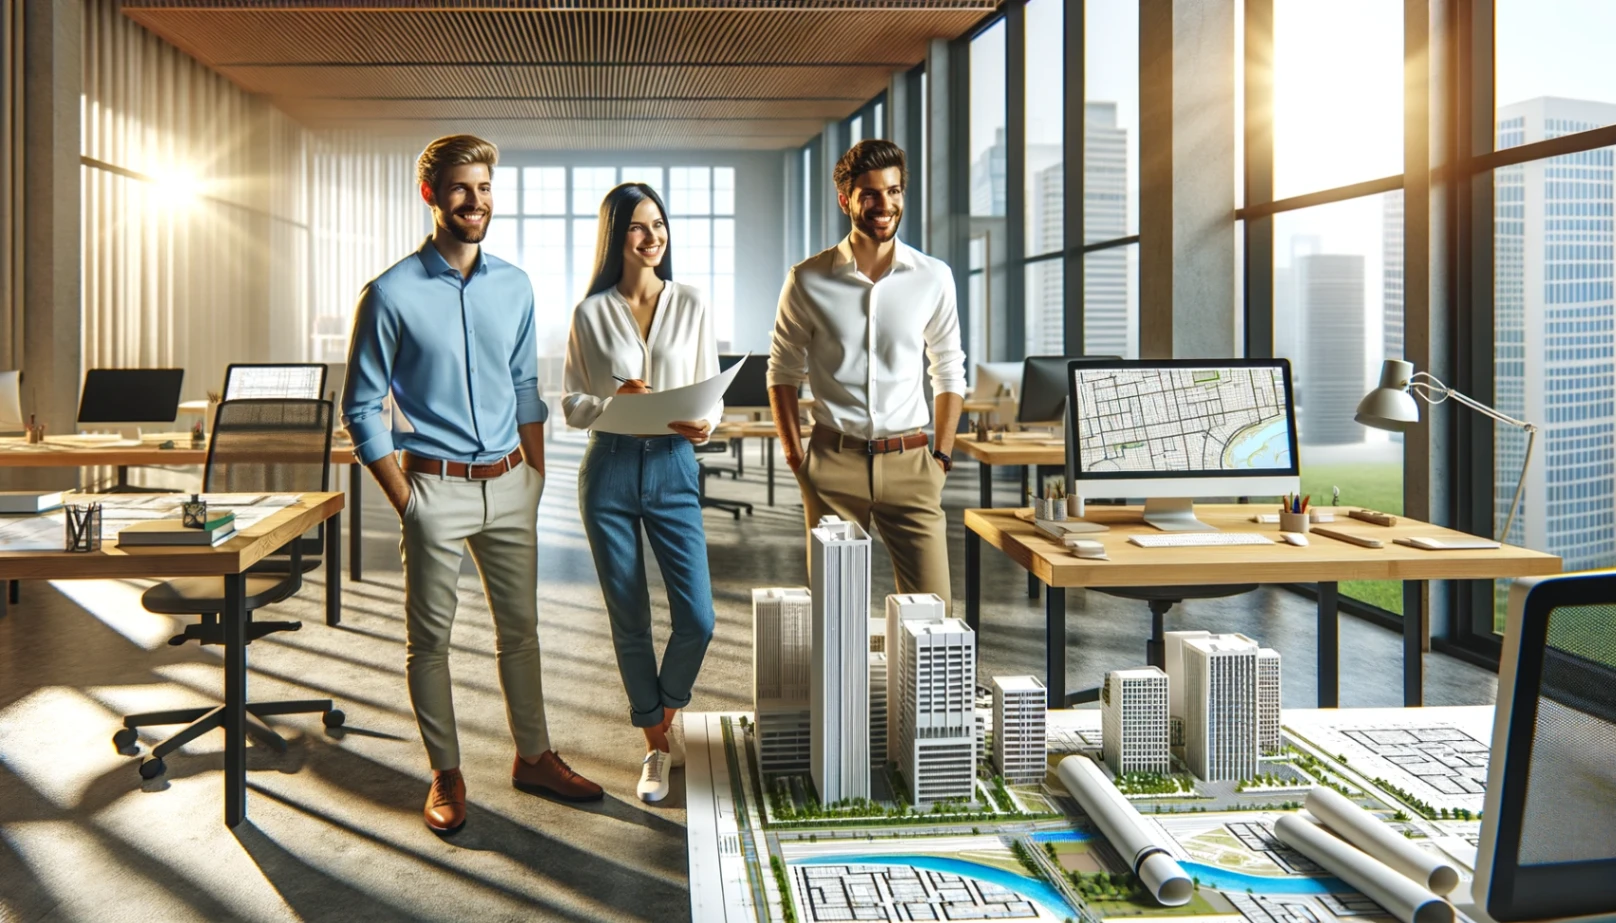 Urban Planning Development Jobs: Explore Full-Time Positions Starting at $55,000 With Benefits